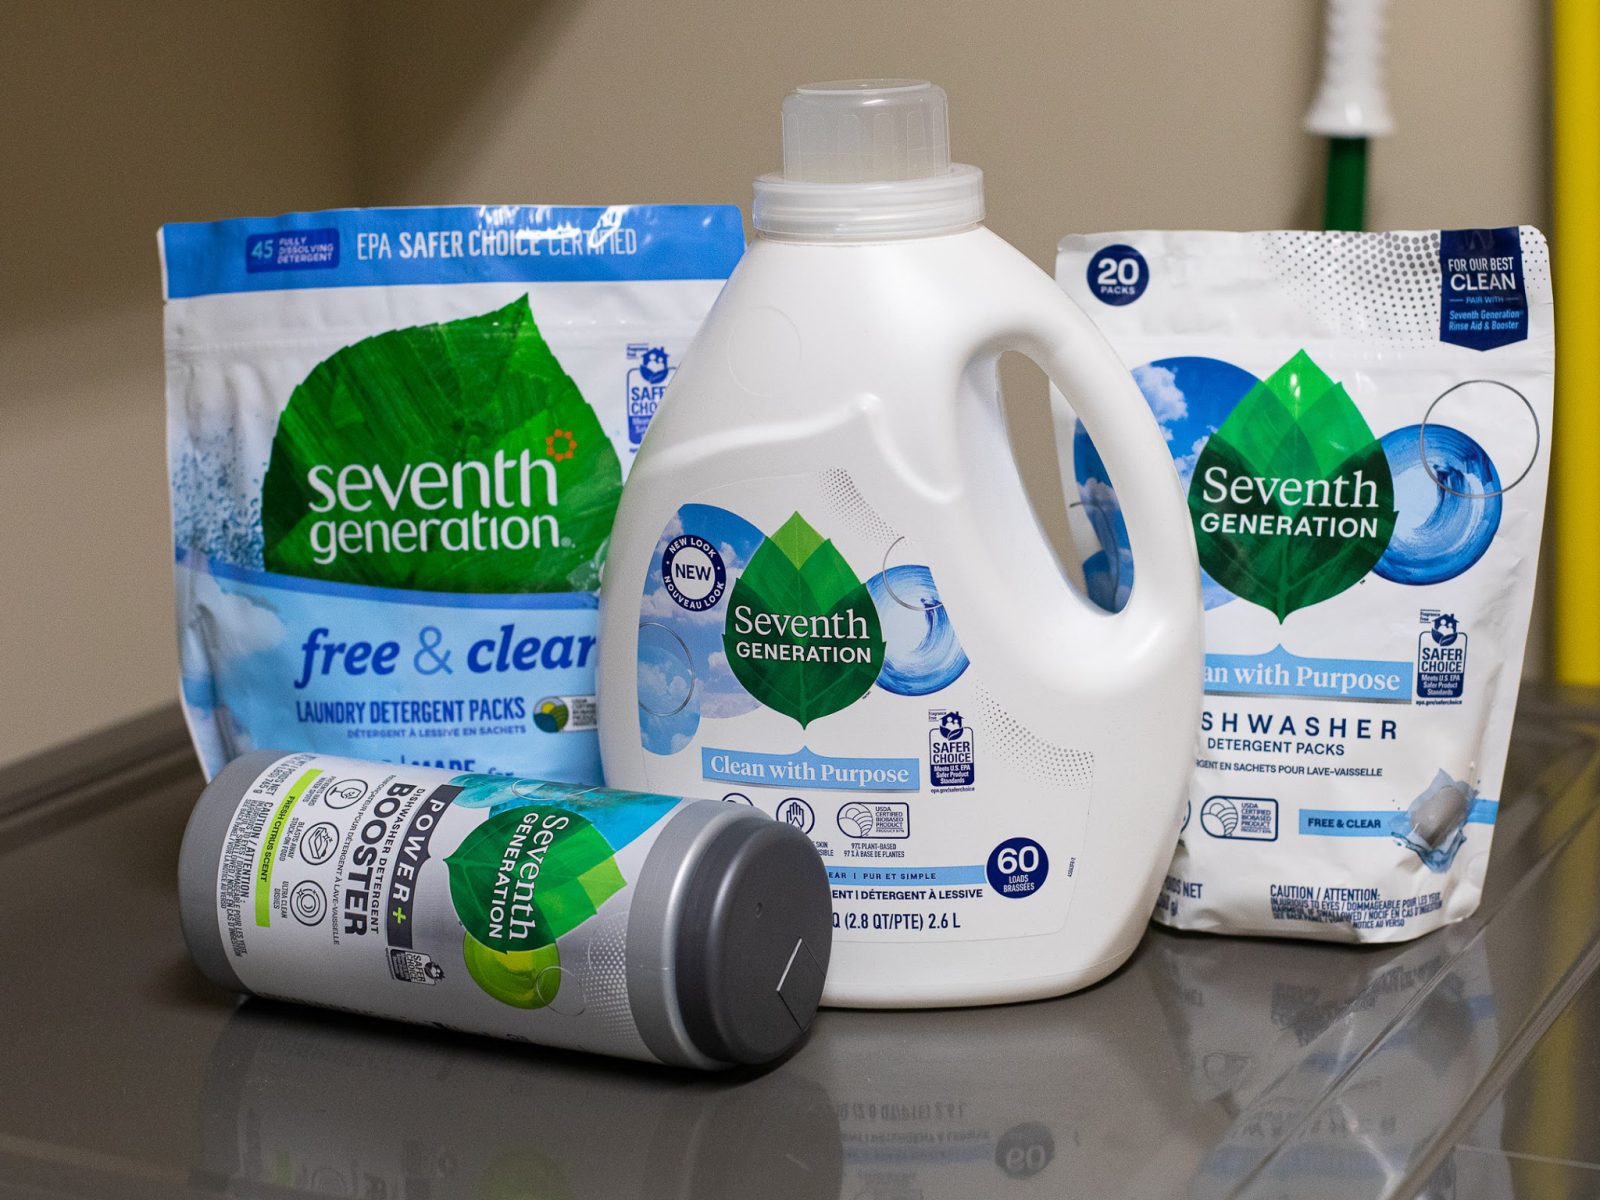 Go Back To School With Great Products & Savings – Save On Seventh Generation Laundry & Dishwashing Products At Publix